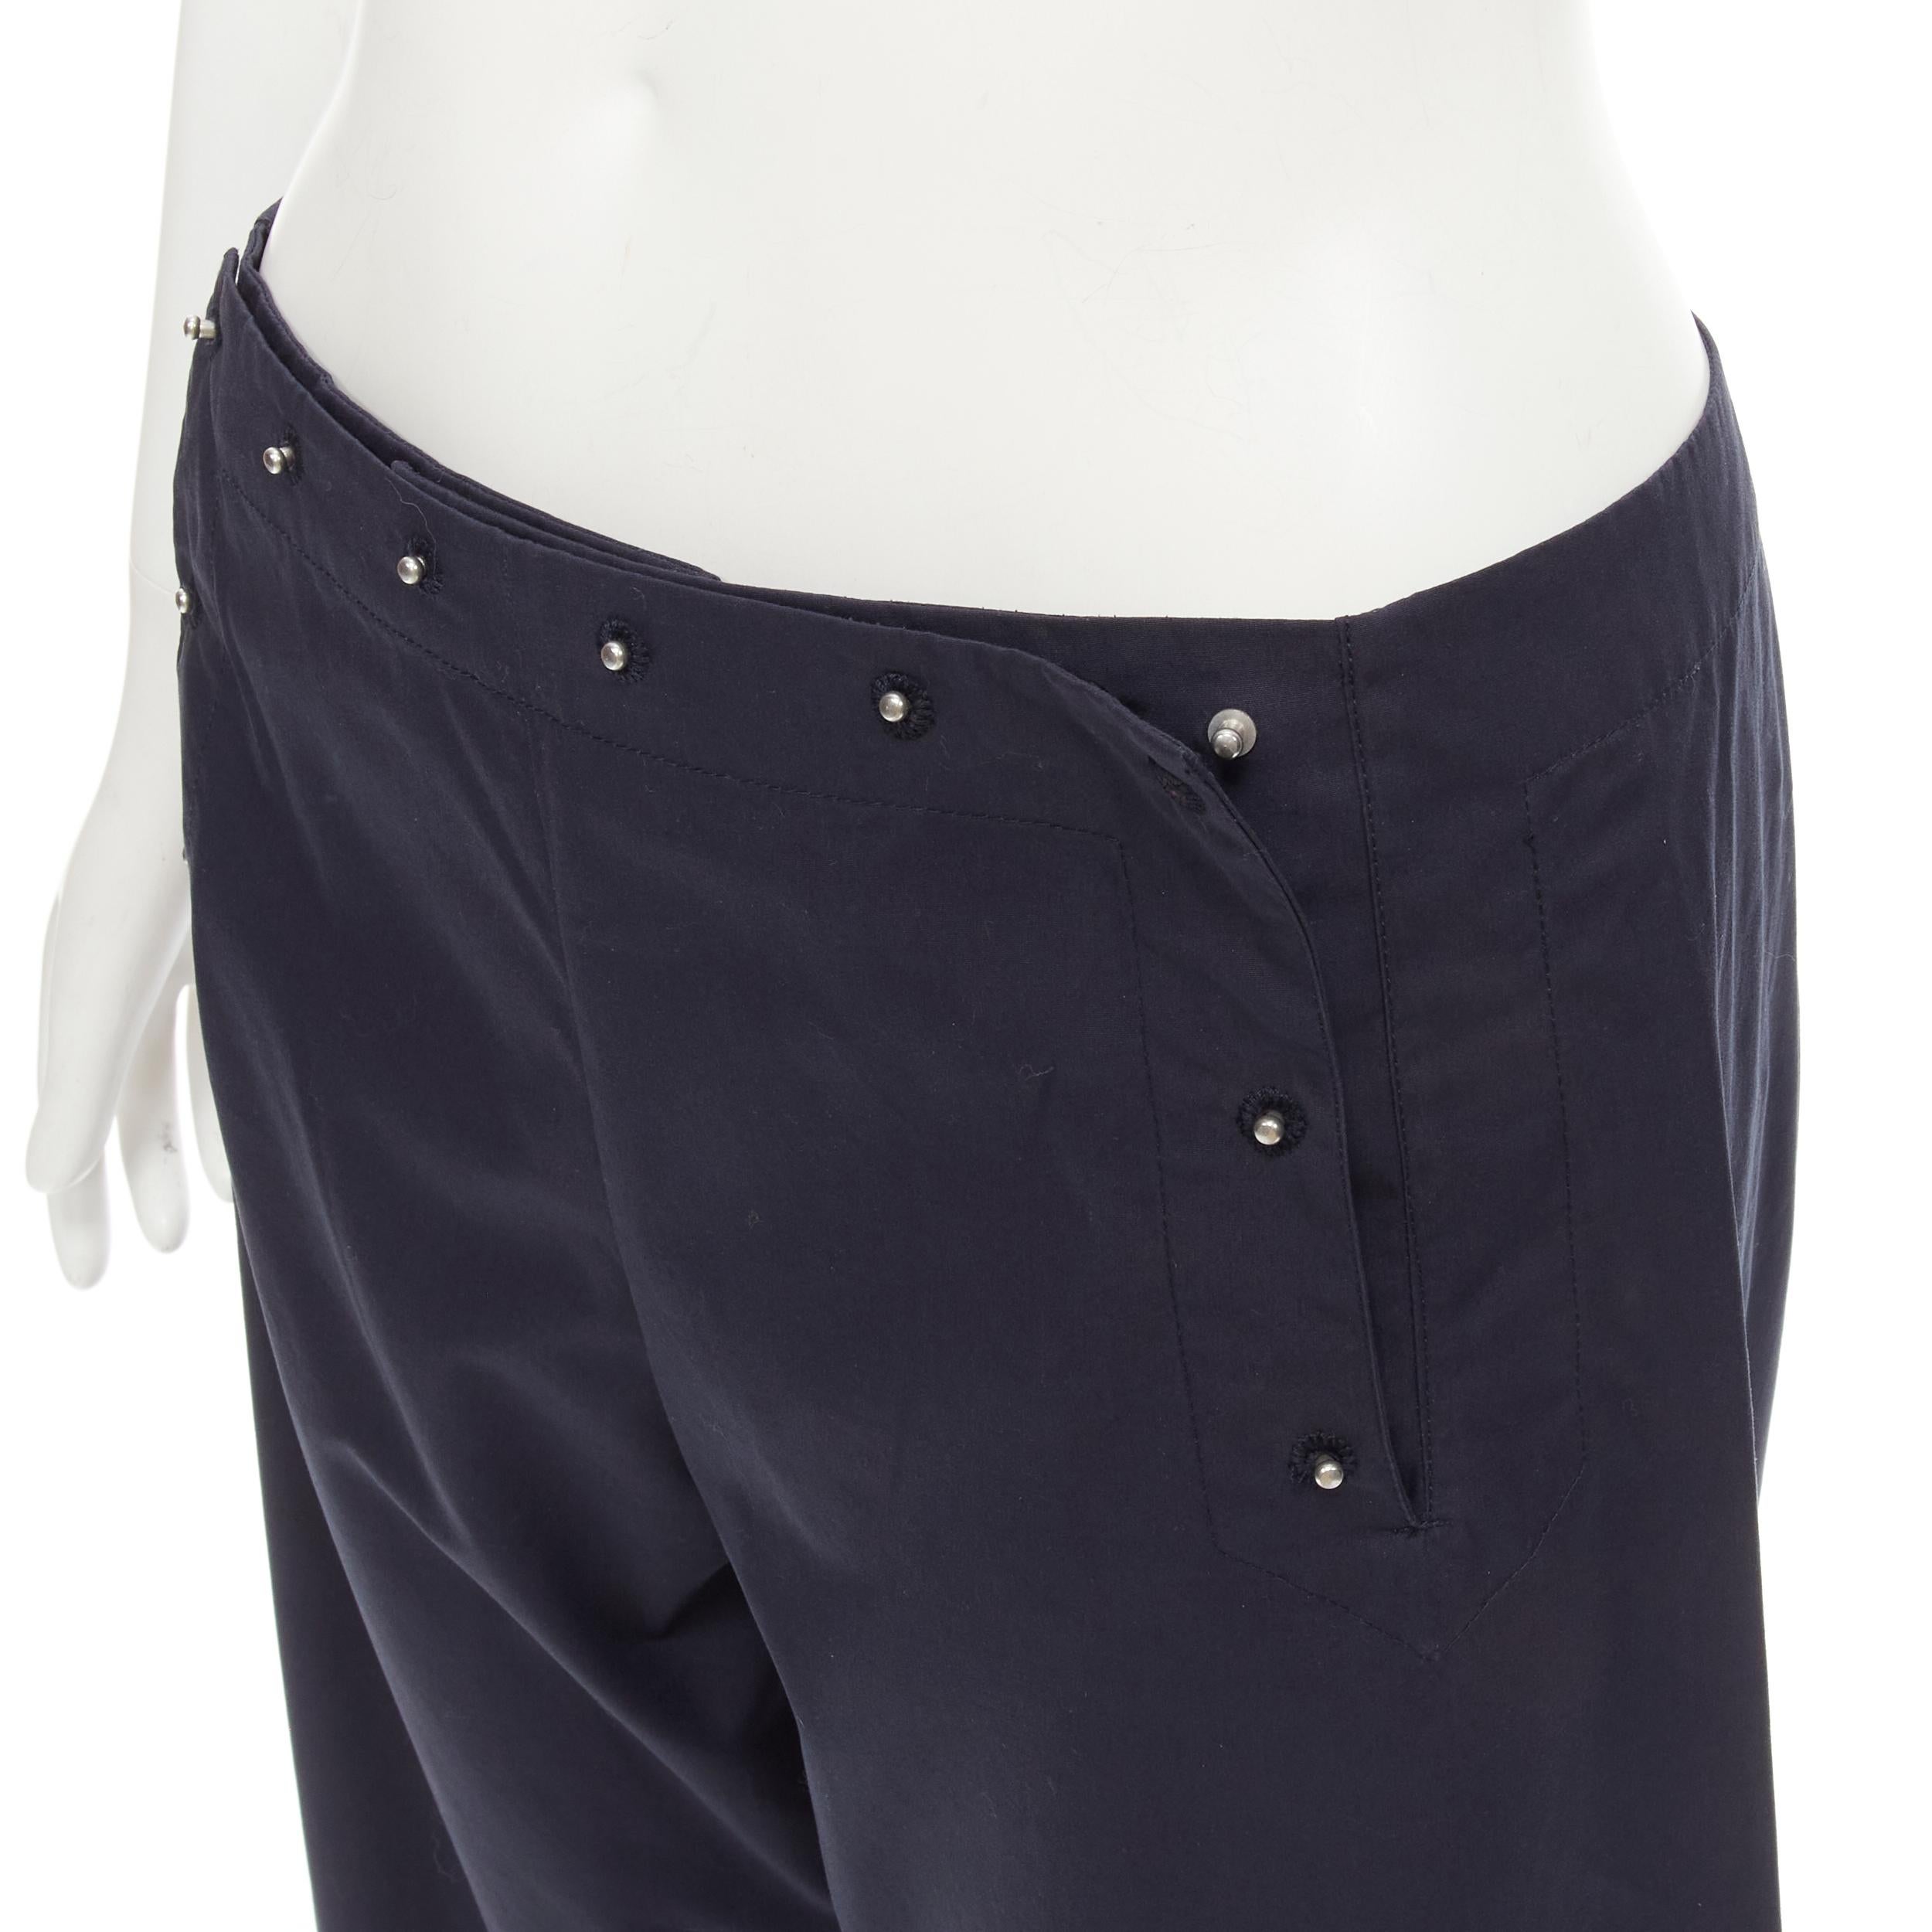 JEAN PAUL GAULTIER Vintage navy silver button wide leg nautical pants IT42 M 
Reference: AEMA/A00099 
Brand: Jean Paul Gaultier 
Material: Cotton 
Color: Navy 
Pattern: Solid 
Closure: Pin button 
Extra Detail: Silver-tone pin buttons on front flap.